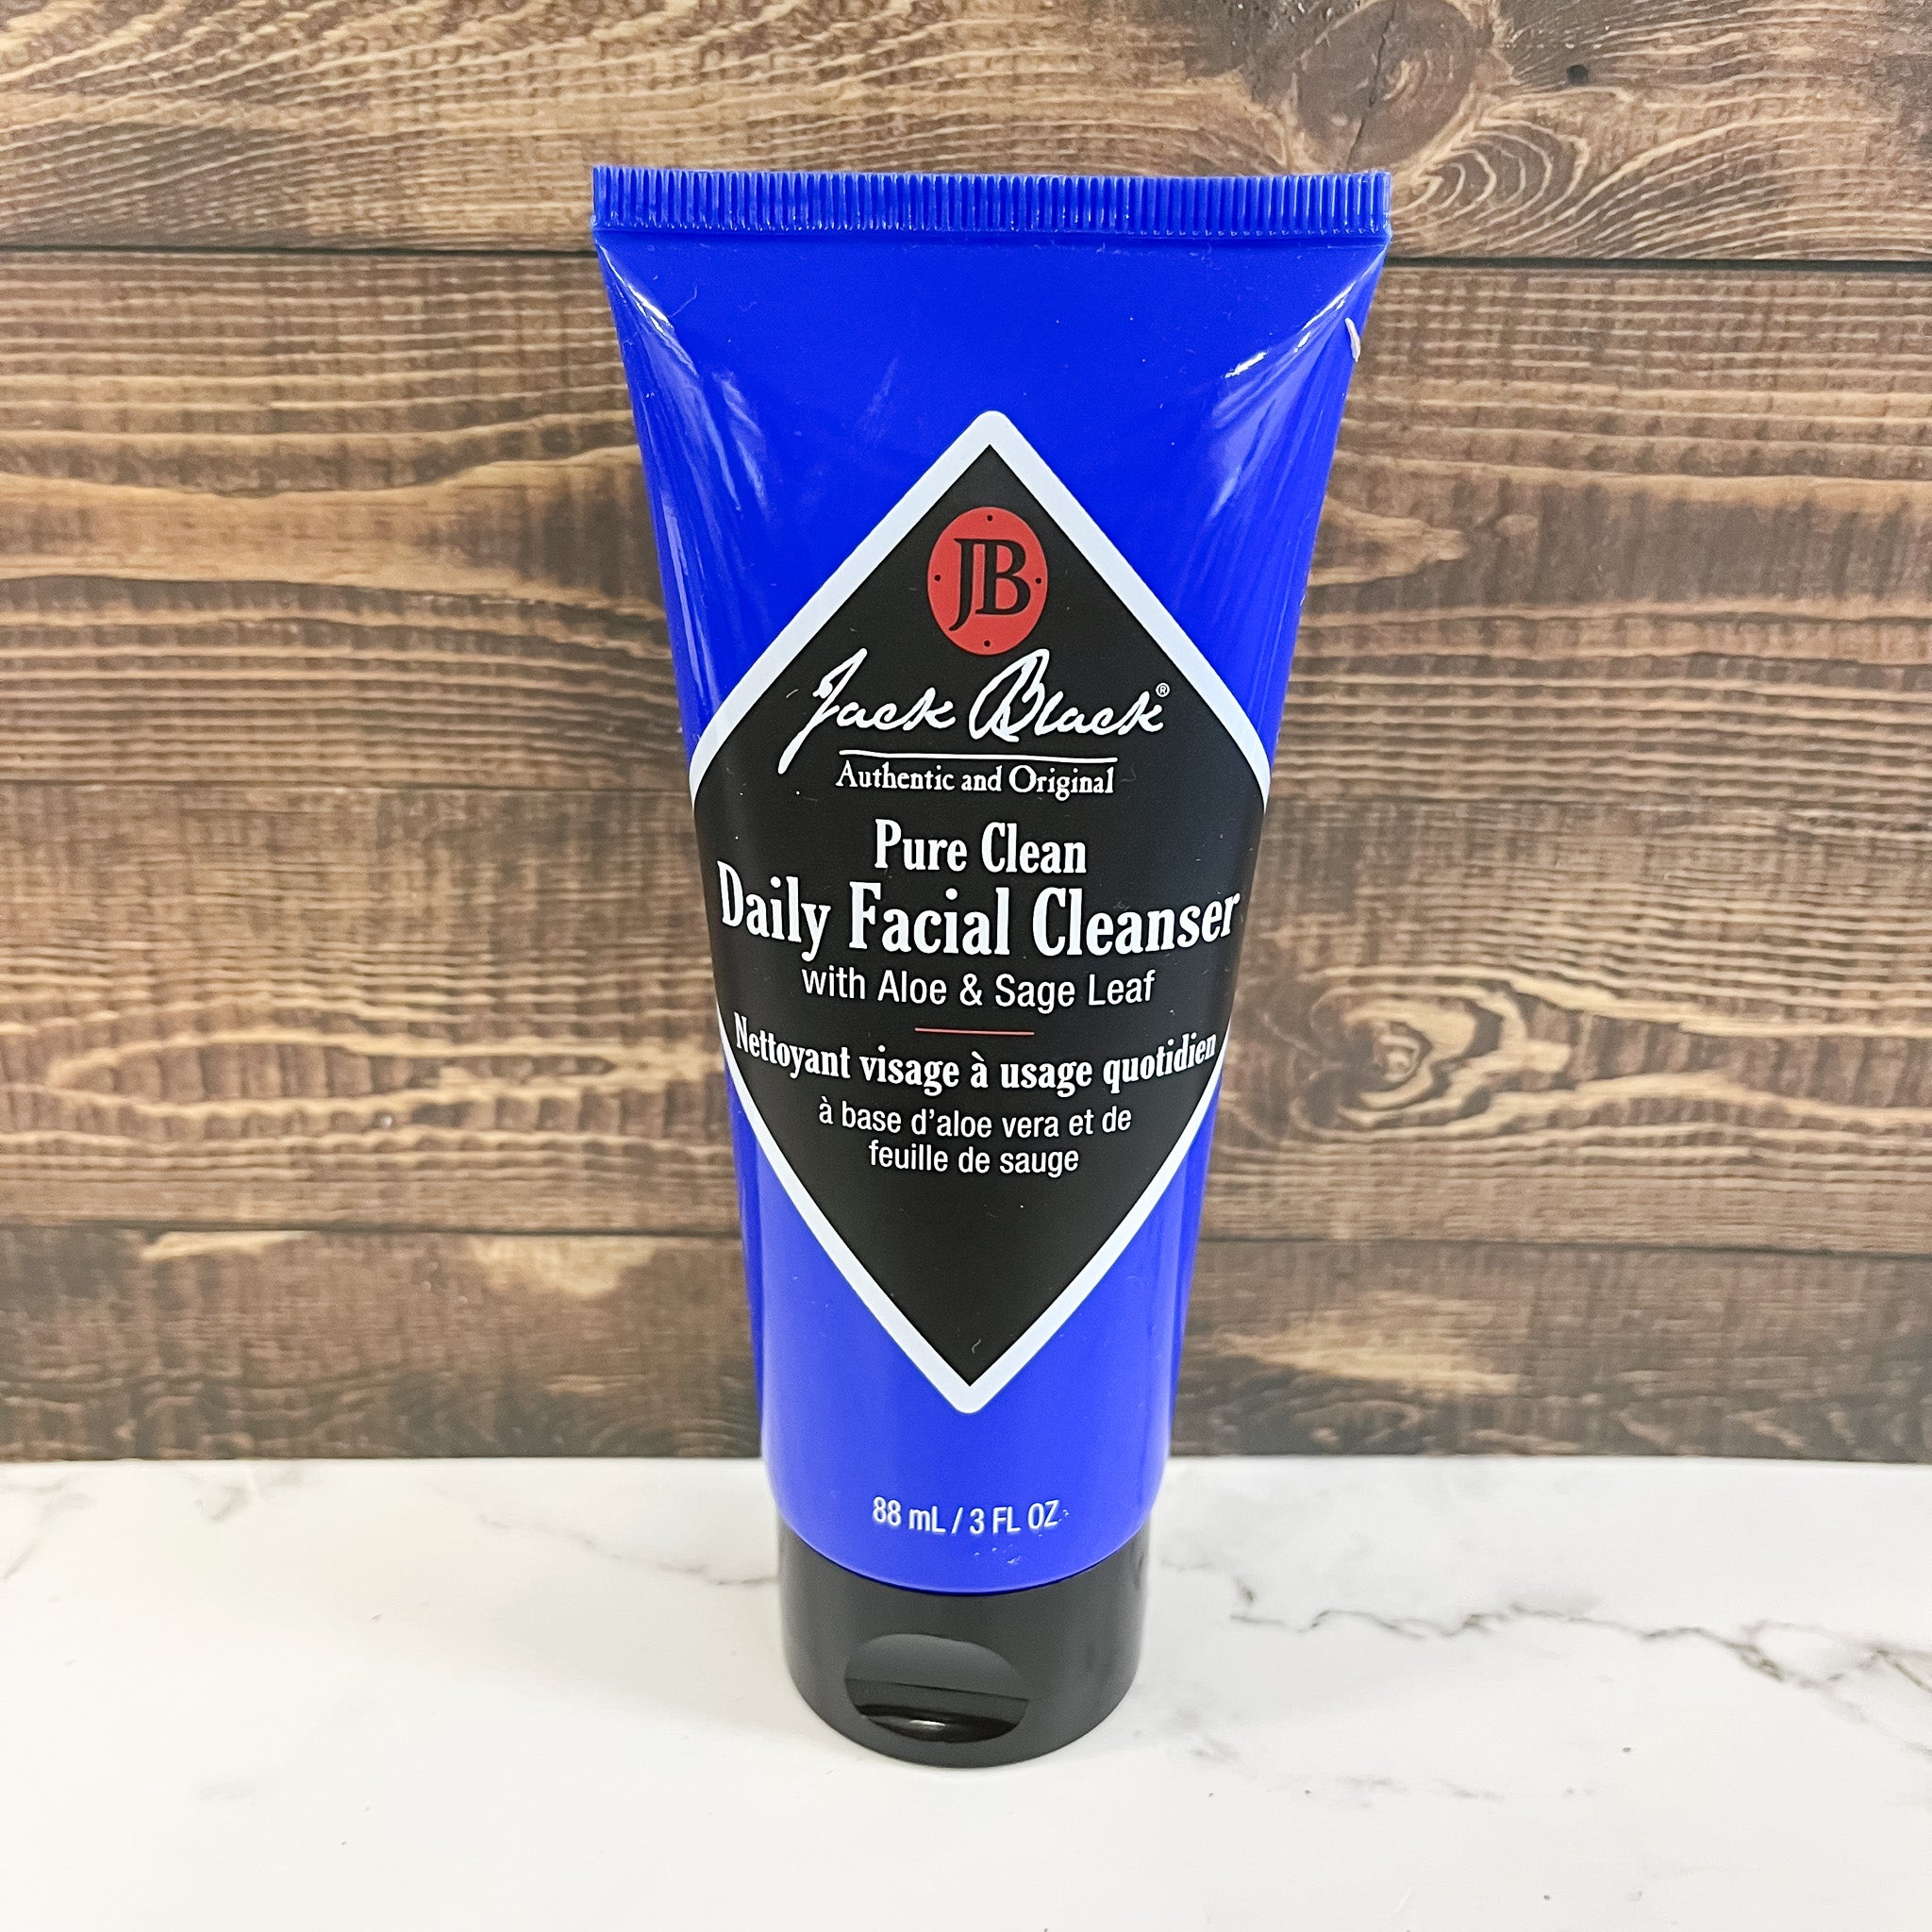 https://www.lylasclothig.shop/wp-content/uploads/1687/72/only-16-00-usd-for-jack-black-pure-clean-daily-facial-cleanser-online-at-the-shop_0.jpg